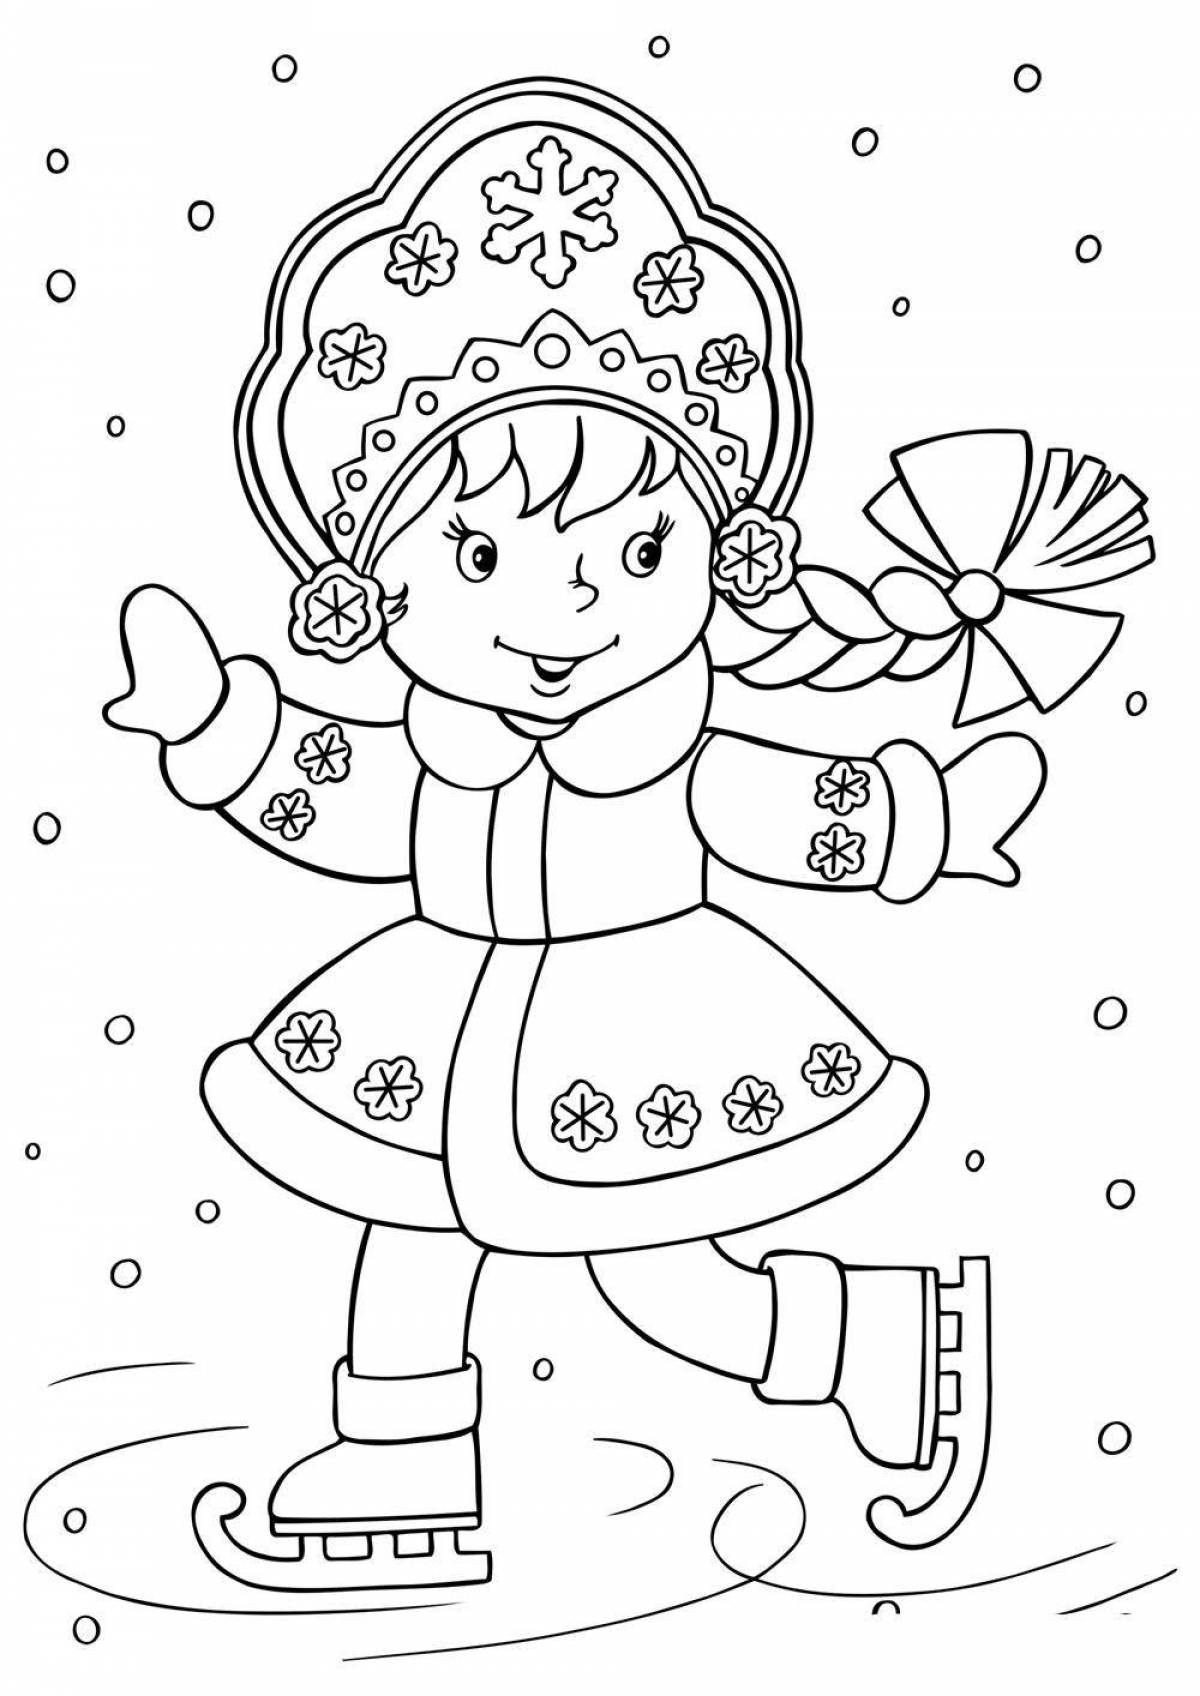 Inviting Christmas coloring pages for girls 8 years old